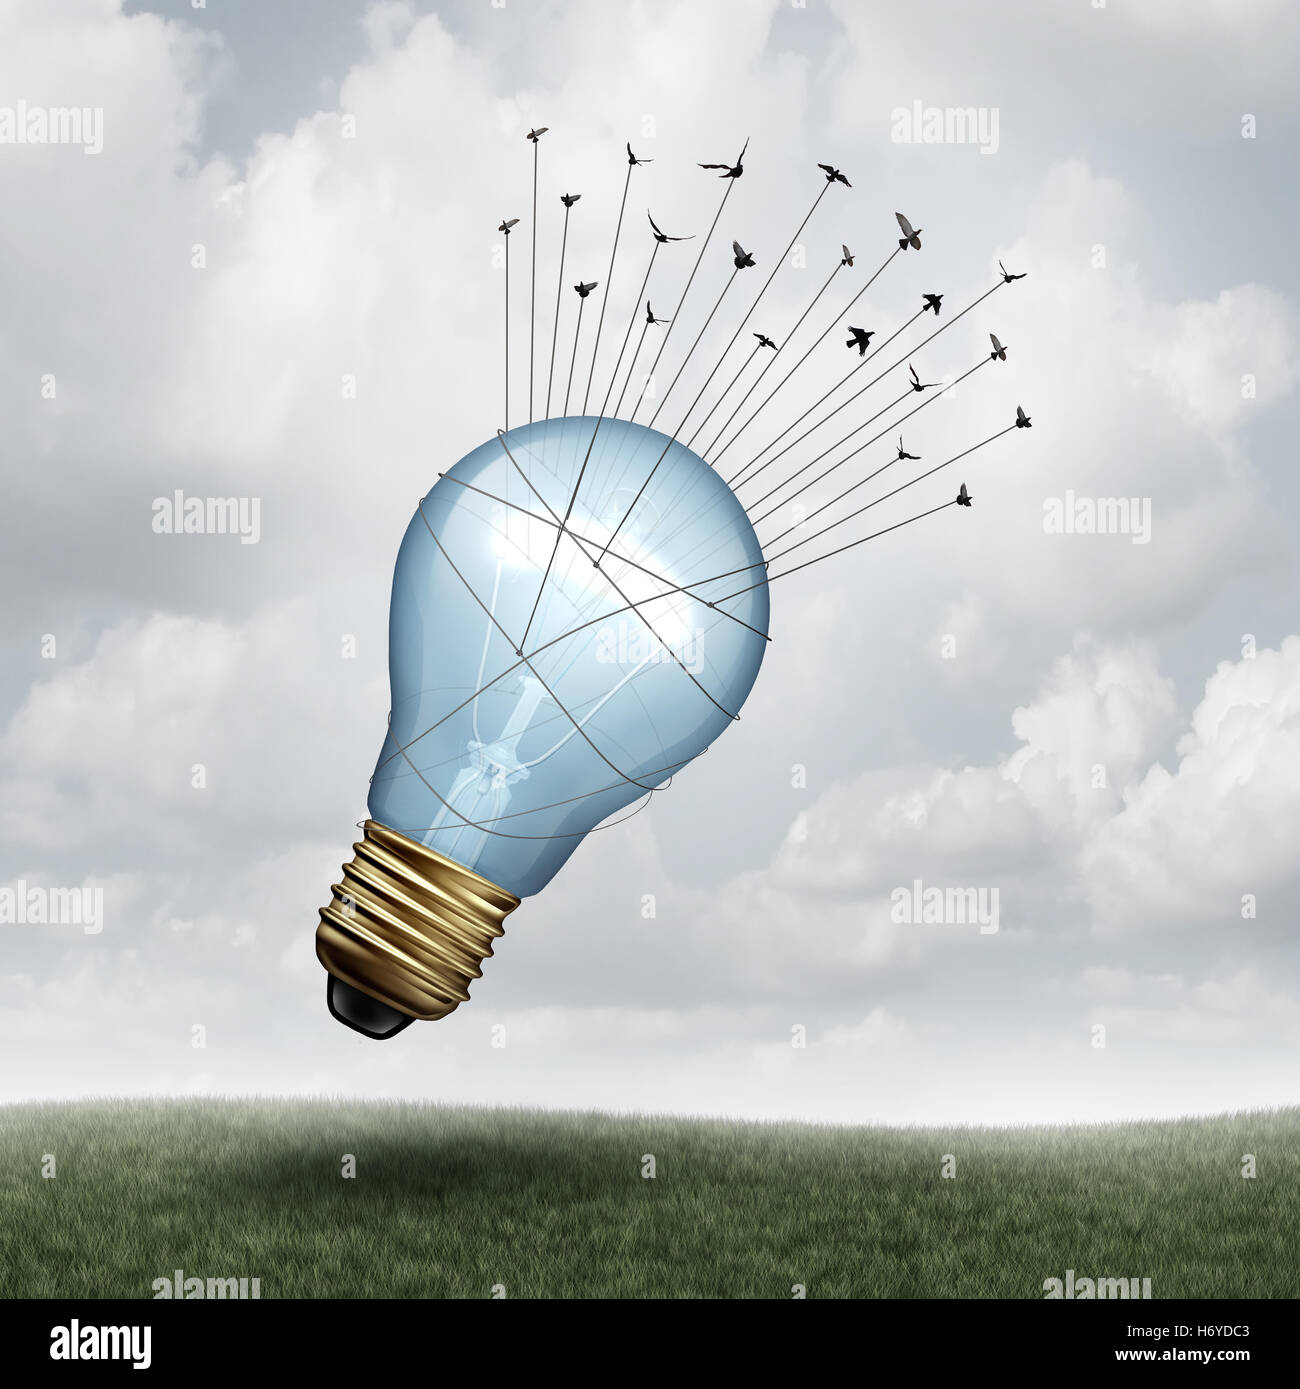 Creative connect and social thinking symbol as a group of birds pulling upward a giant lightbulb as a creativity and inspiration metaphor with 3D illustration elements. Stock Photo